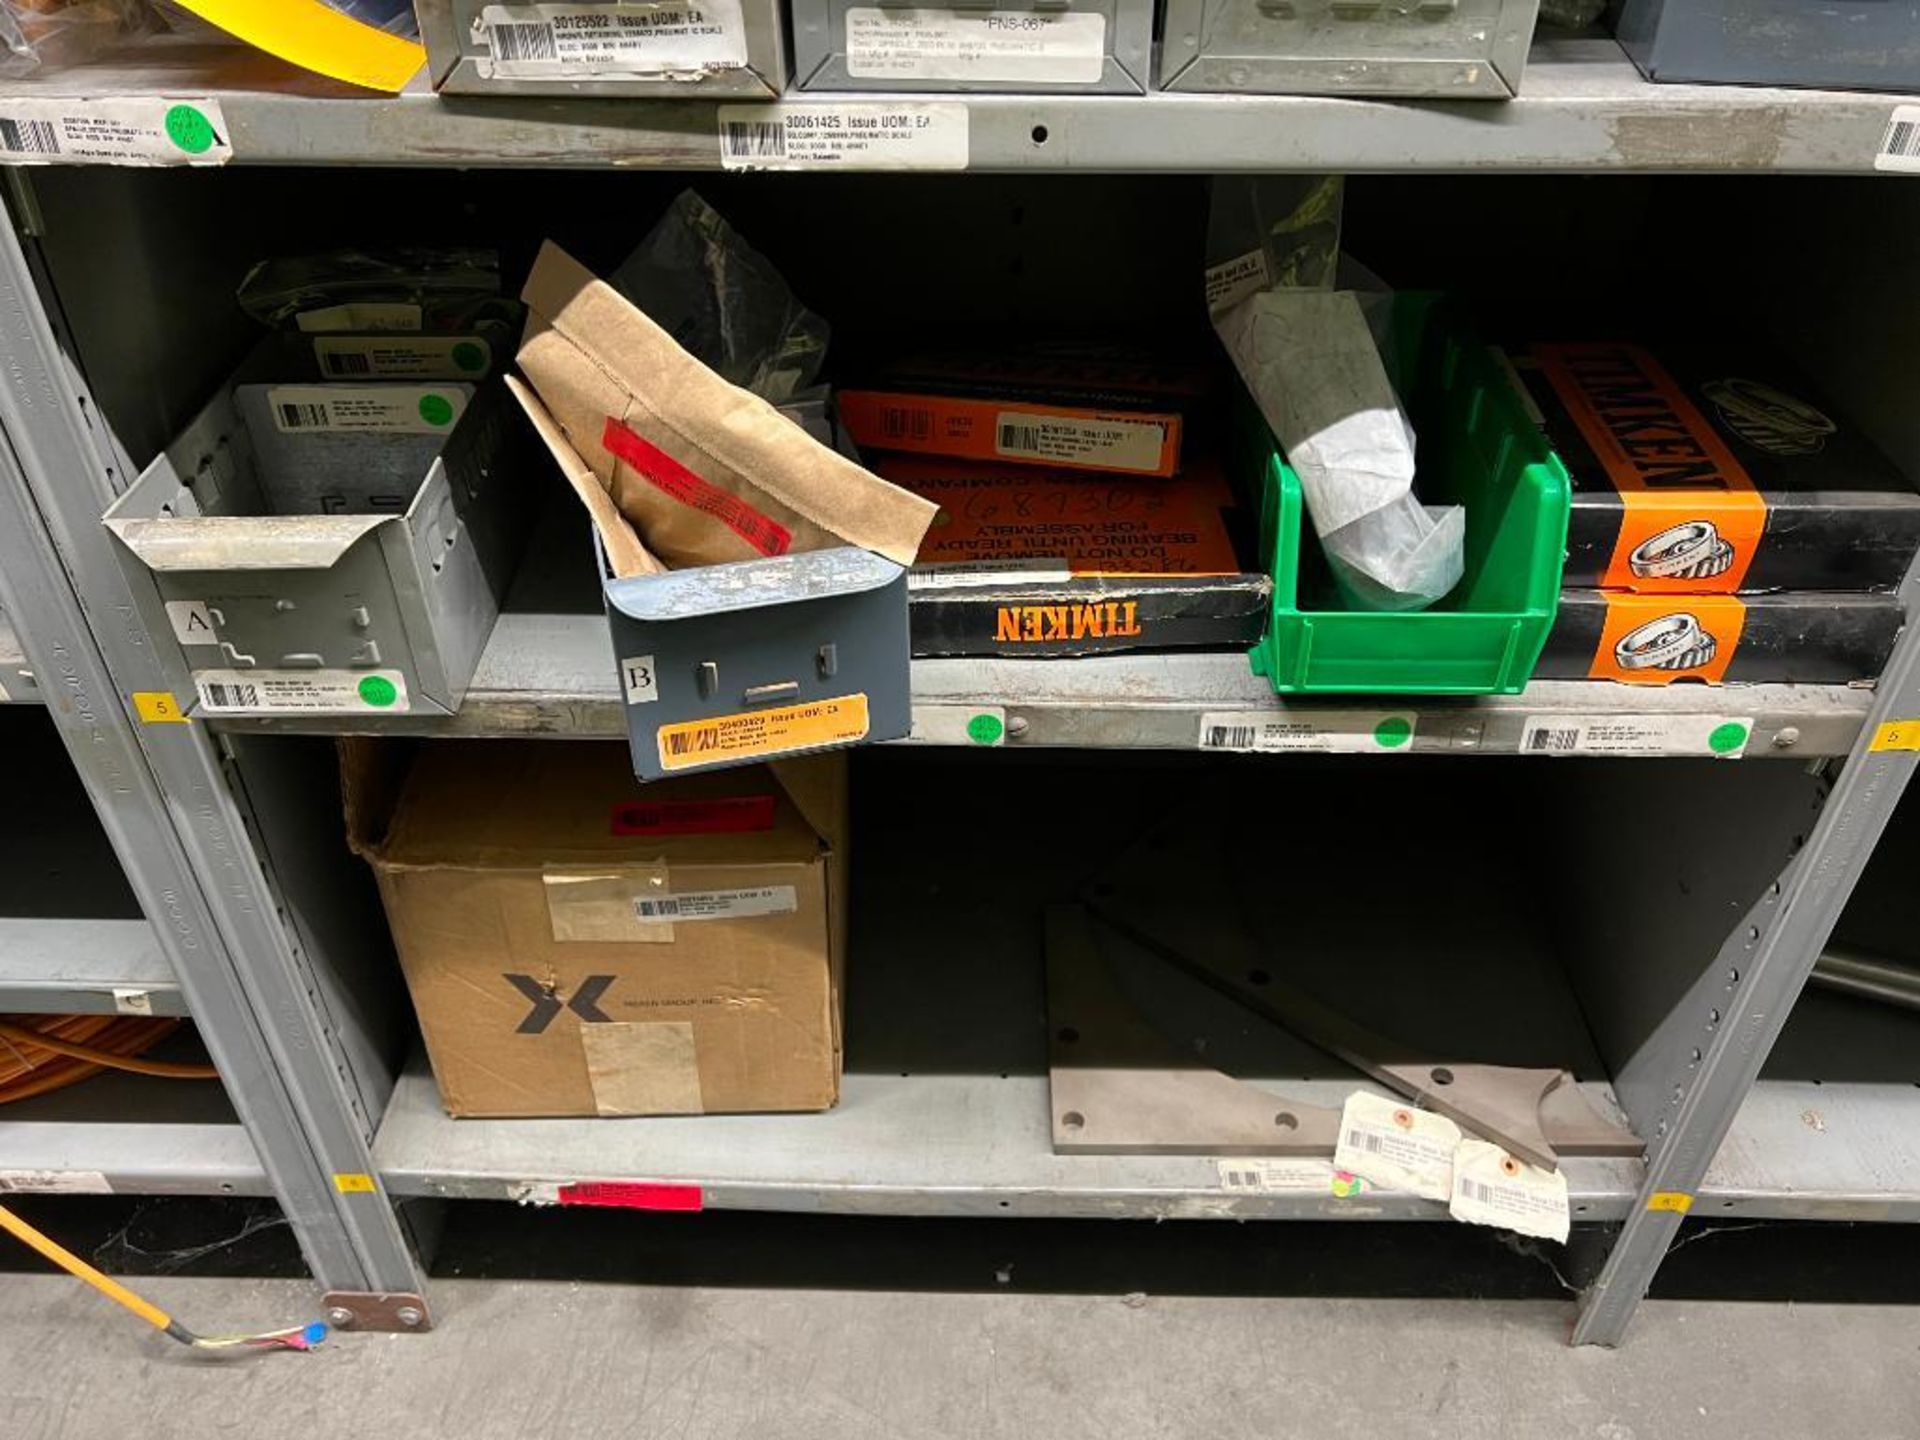 contents of gray shelving units to include, bearings, shafts, filters, fuses, pneumatic scale parts, - Image 25 of 141